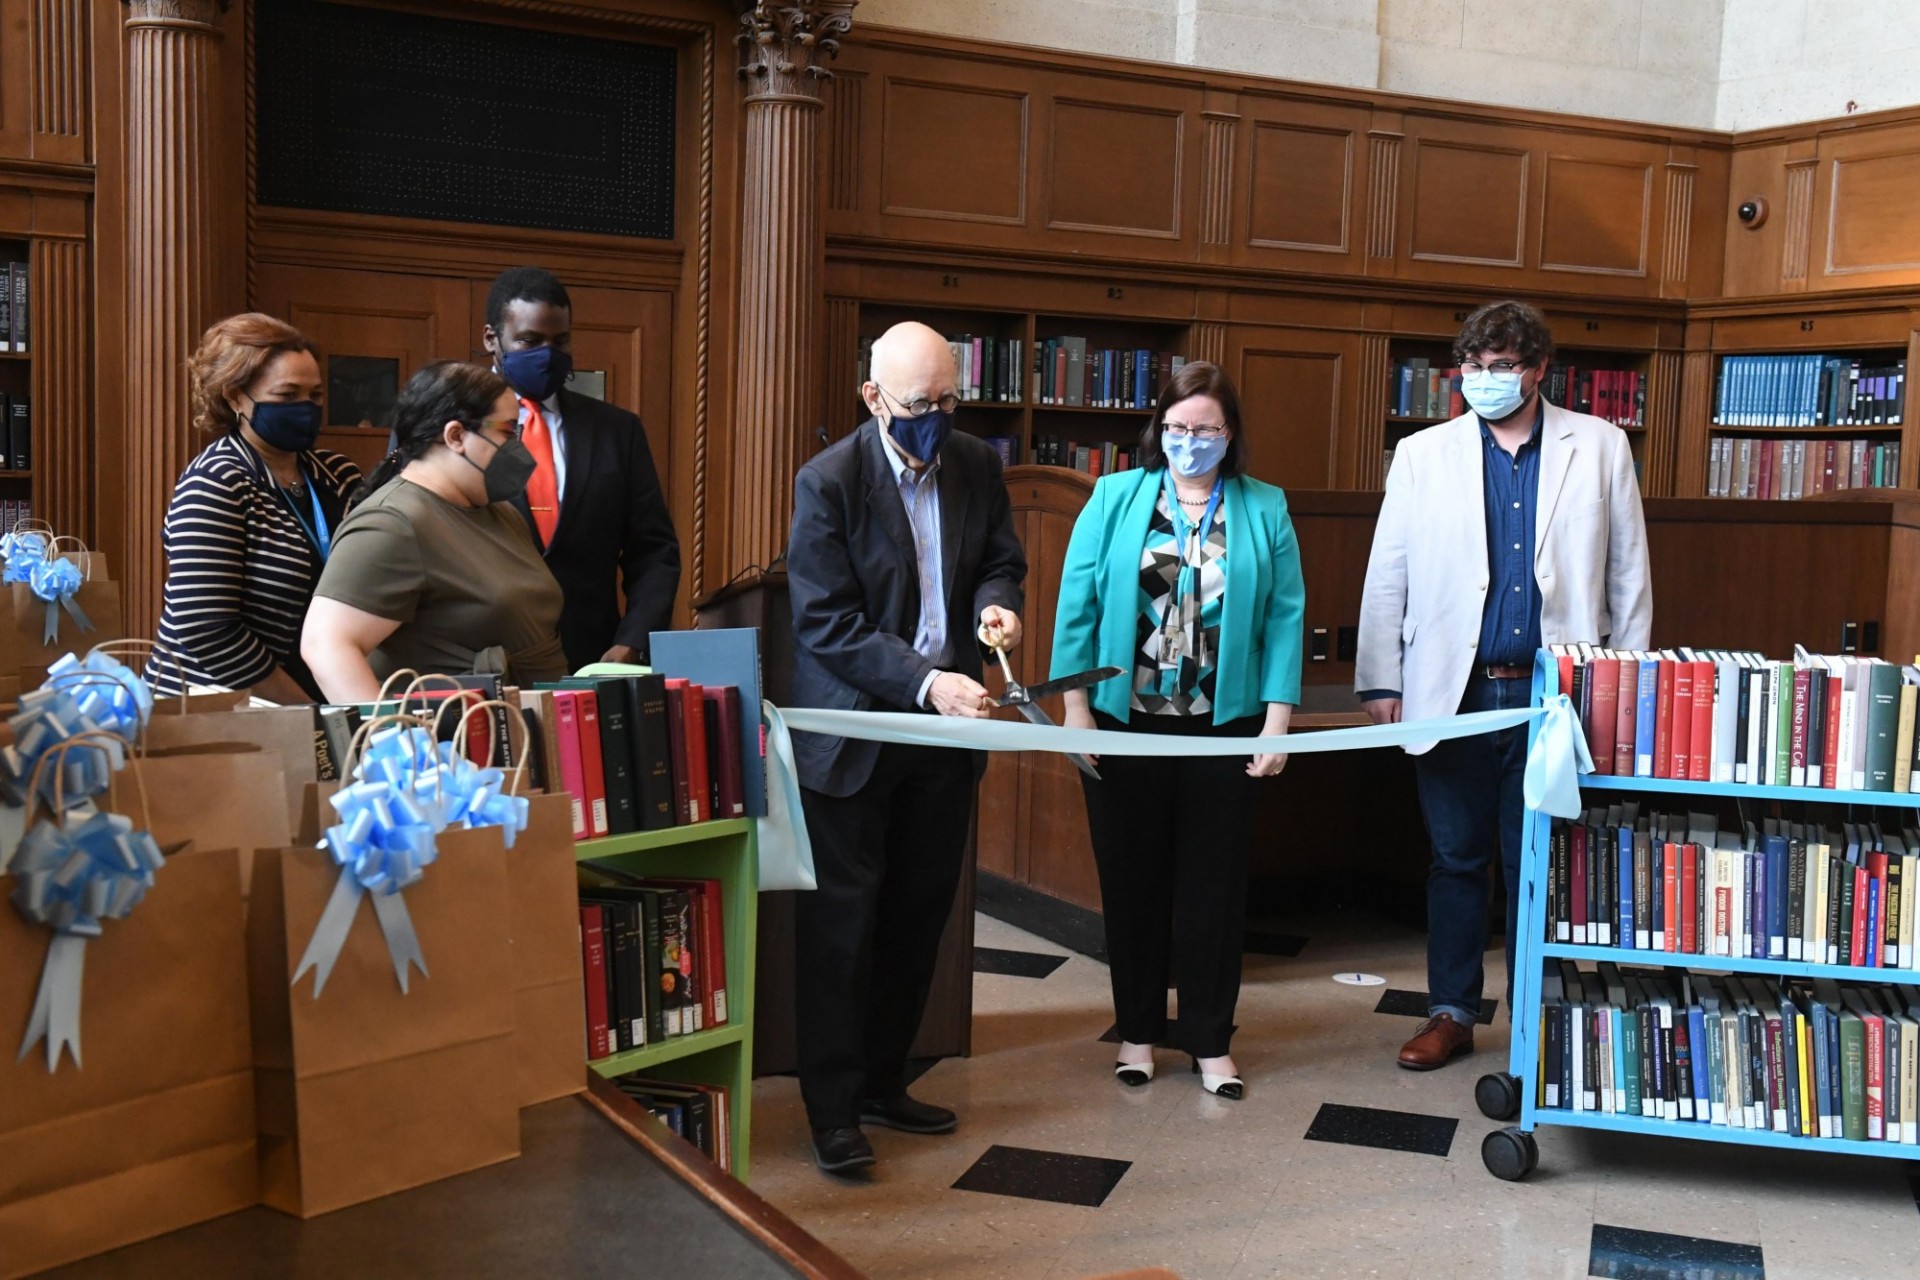 Ira Katznelson cuts the ceremonial reopening ribbon at Butler Libraries. 